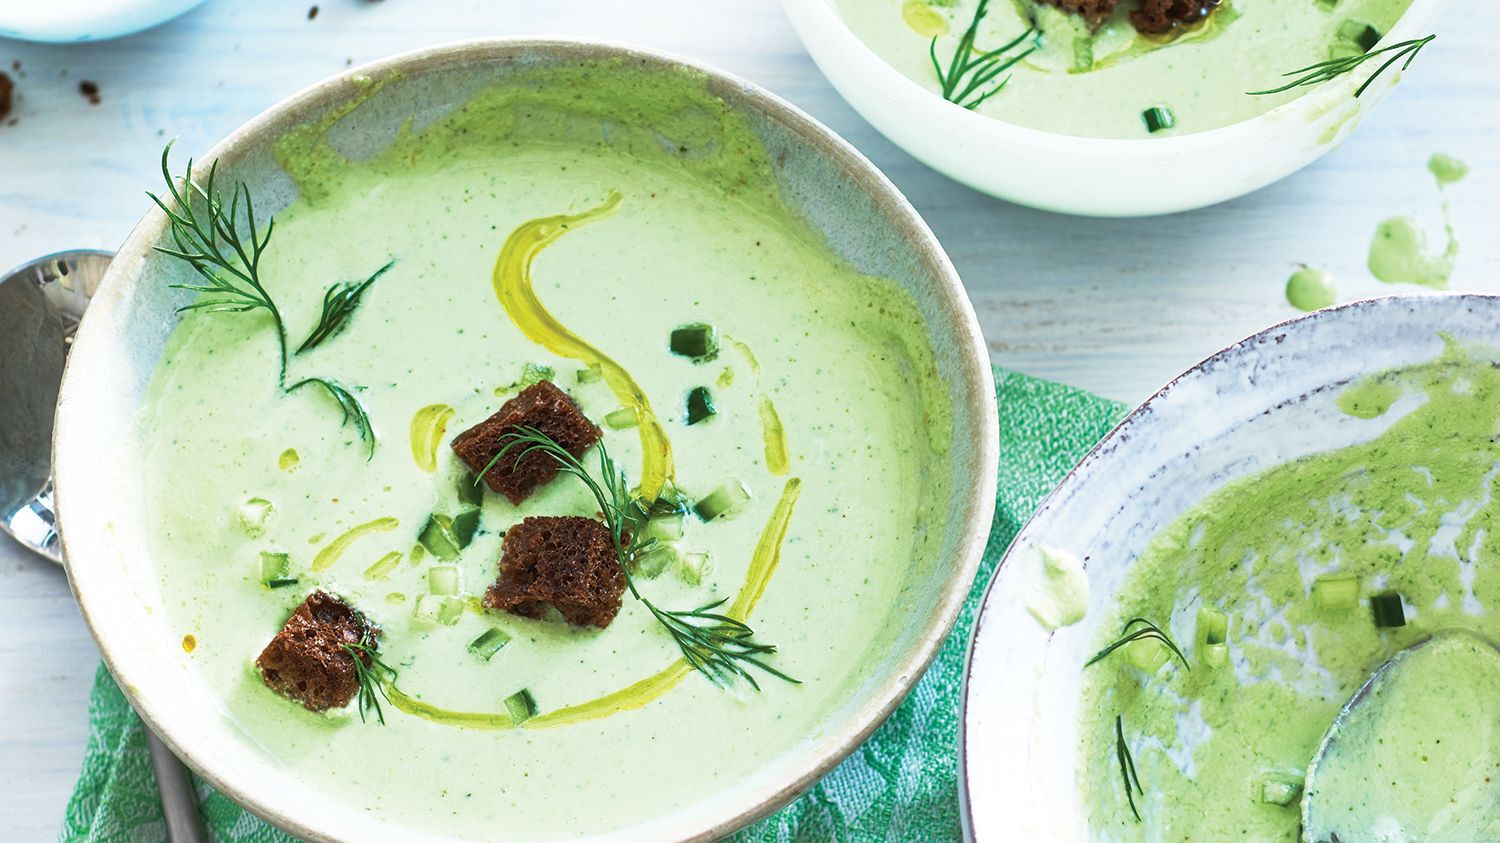 Chilled Cucumber & Dill Soup with Rye Croutons